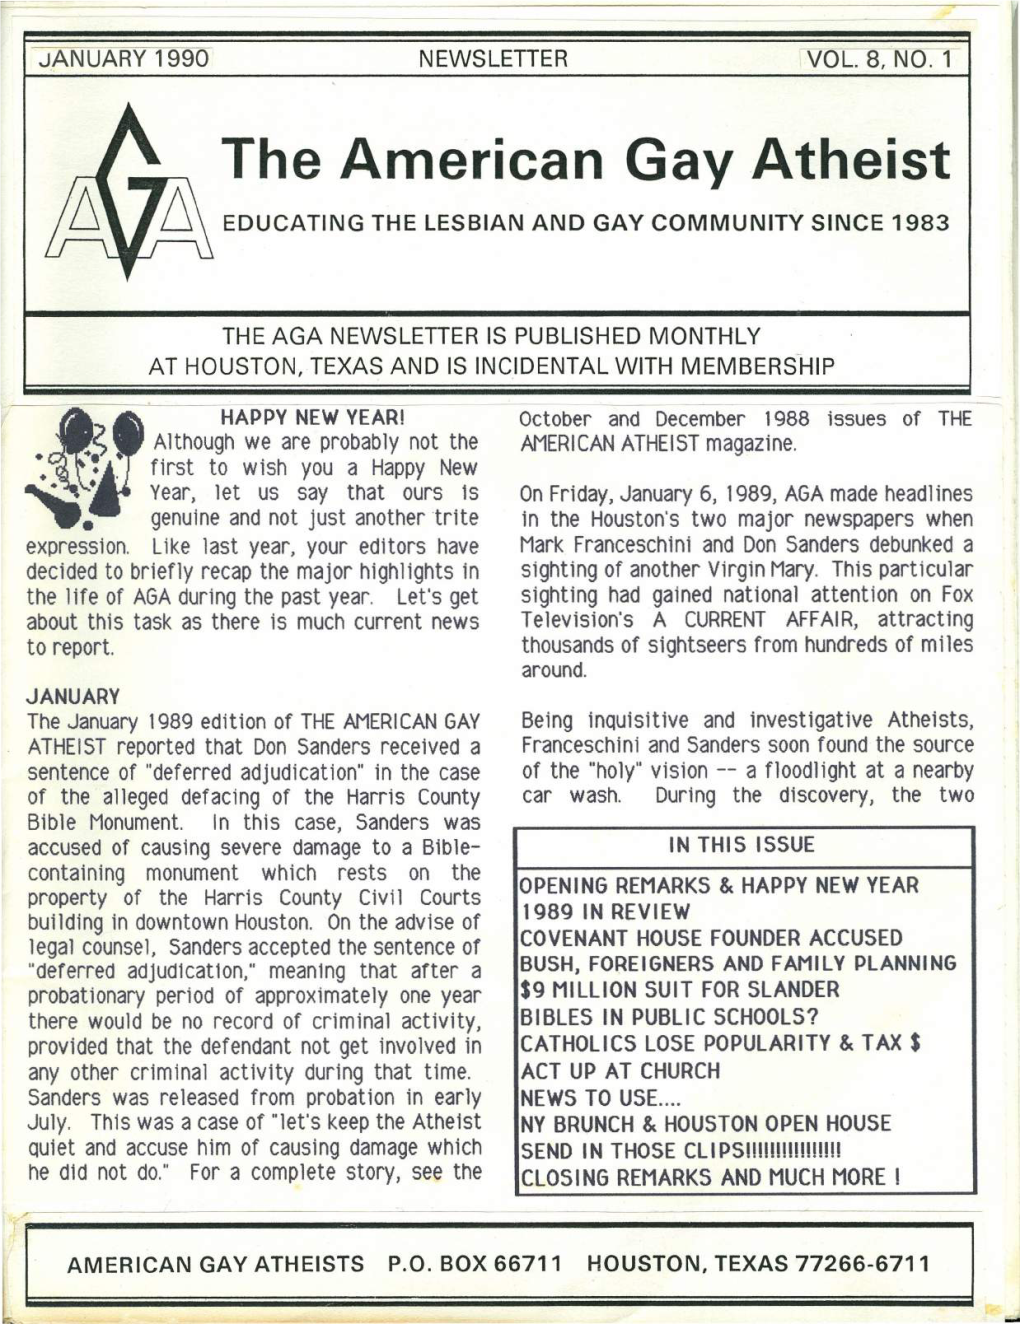 The American Gay Atheist Li EDUCATING the LESBIAN and GAY COMMUNITY SINCE 1983